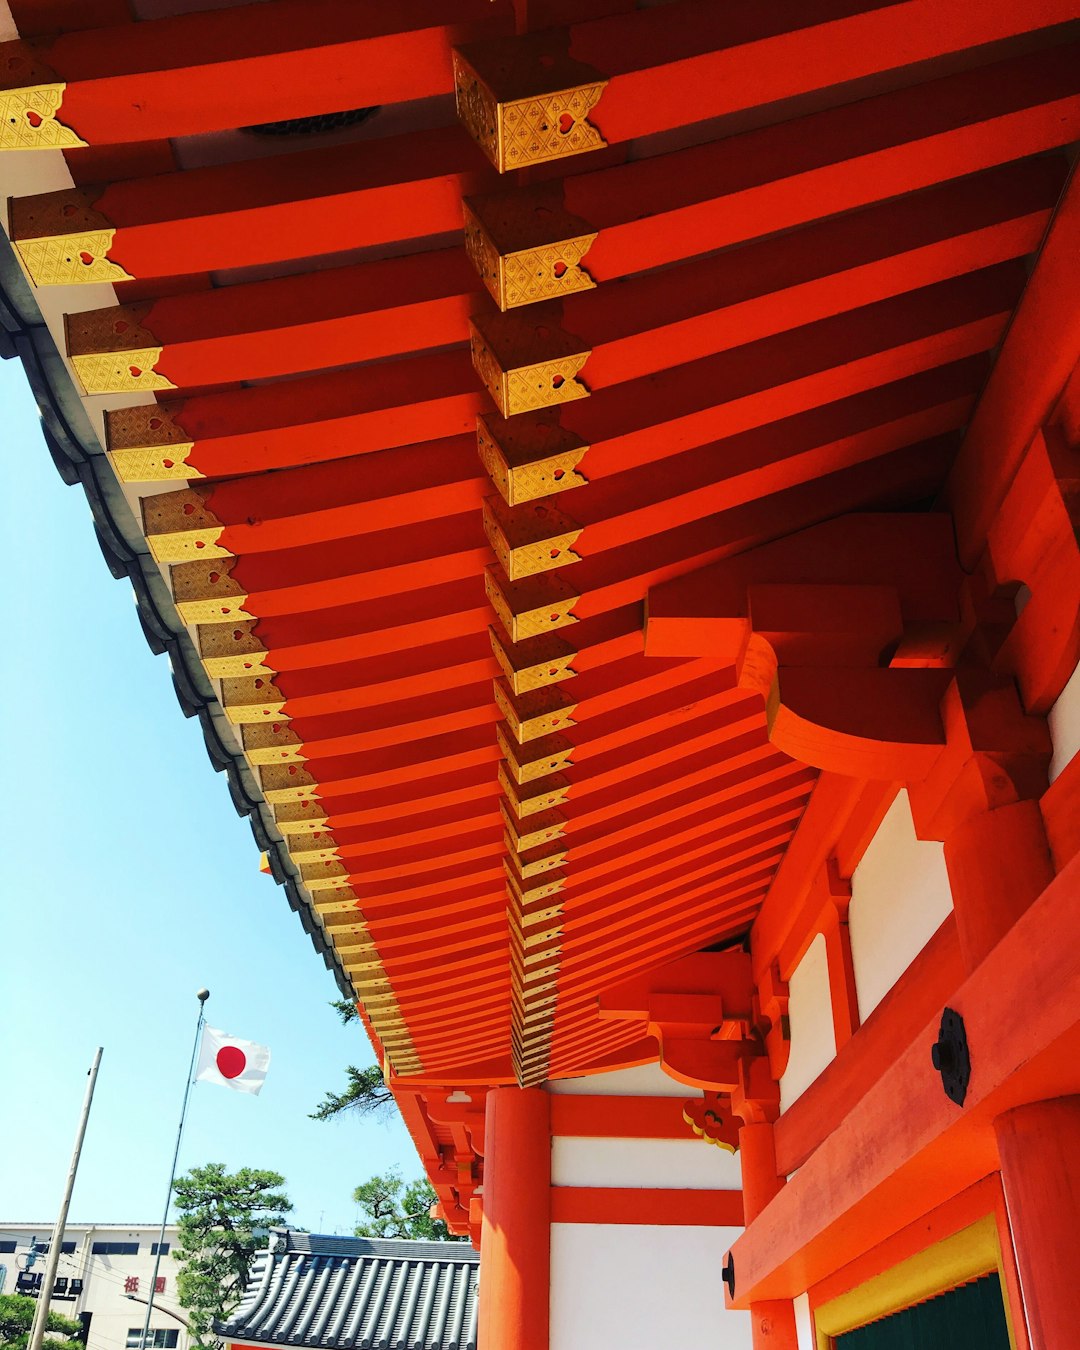 Travel Tips and Stories of Yasaka Shrine in Japan